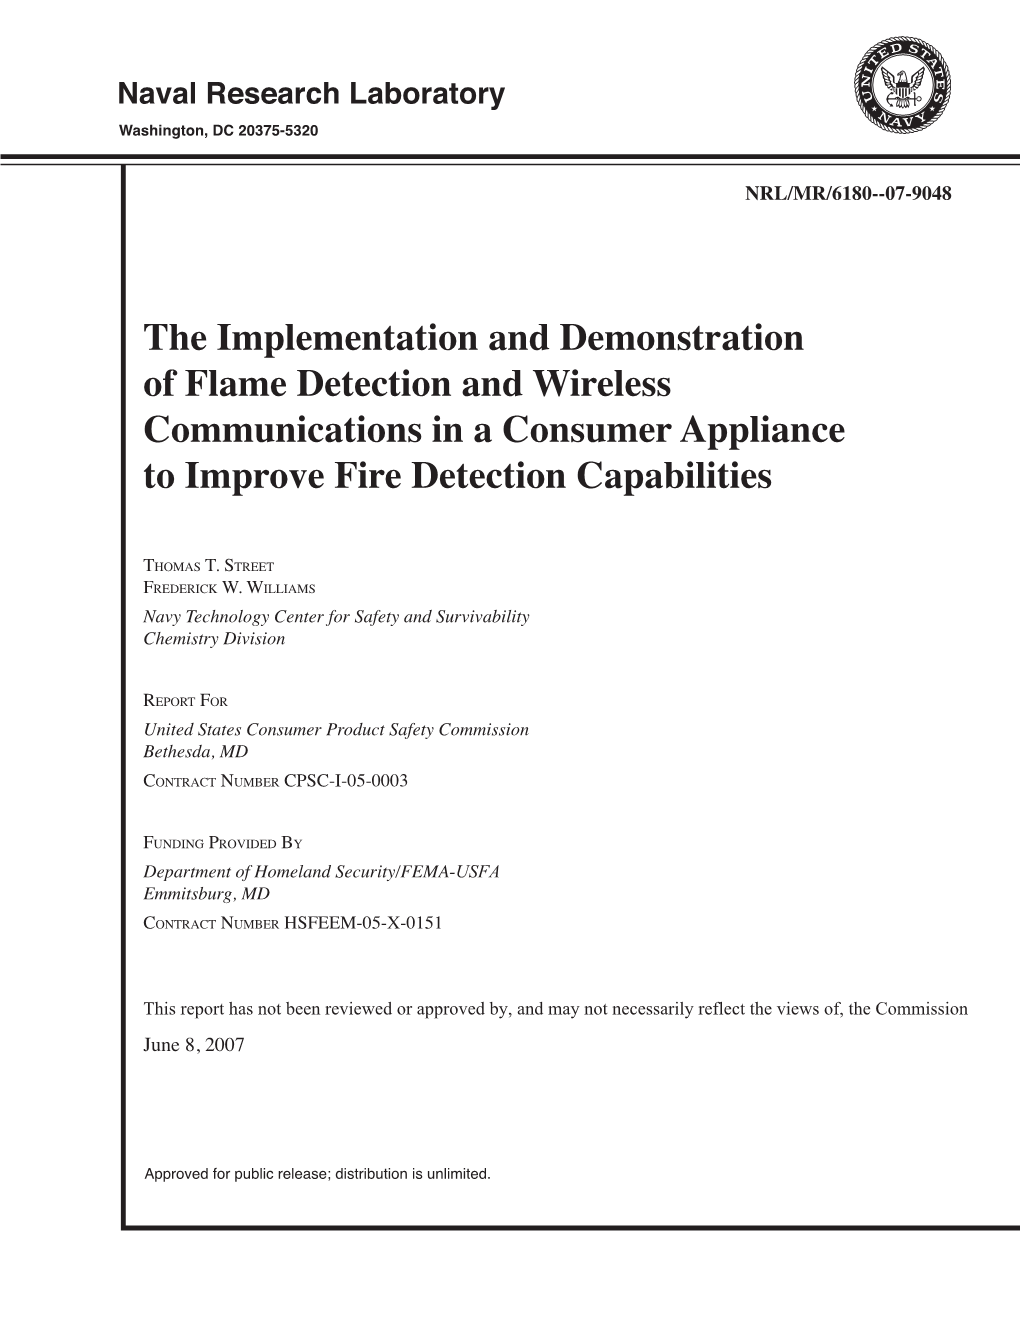 The Implementation and Demonstration of Flame Detection and Wireless Communications in a Consumer Appliance to Improve Fire Detection Capabilities